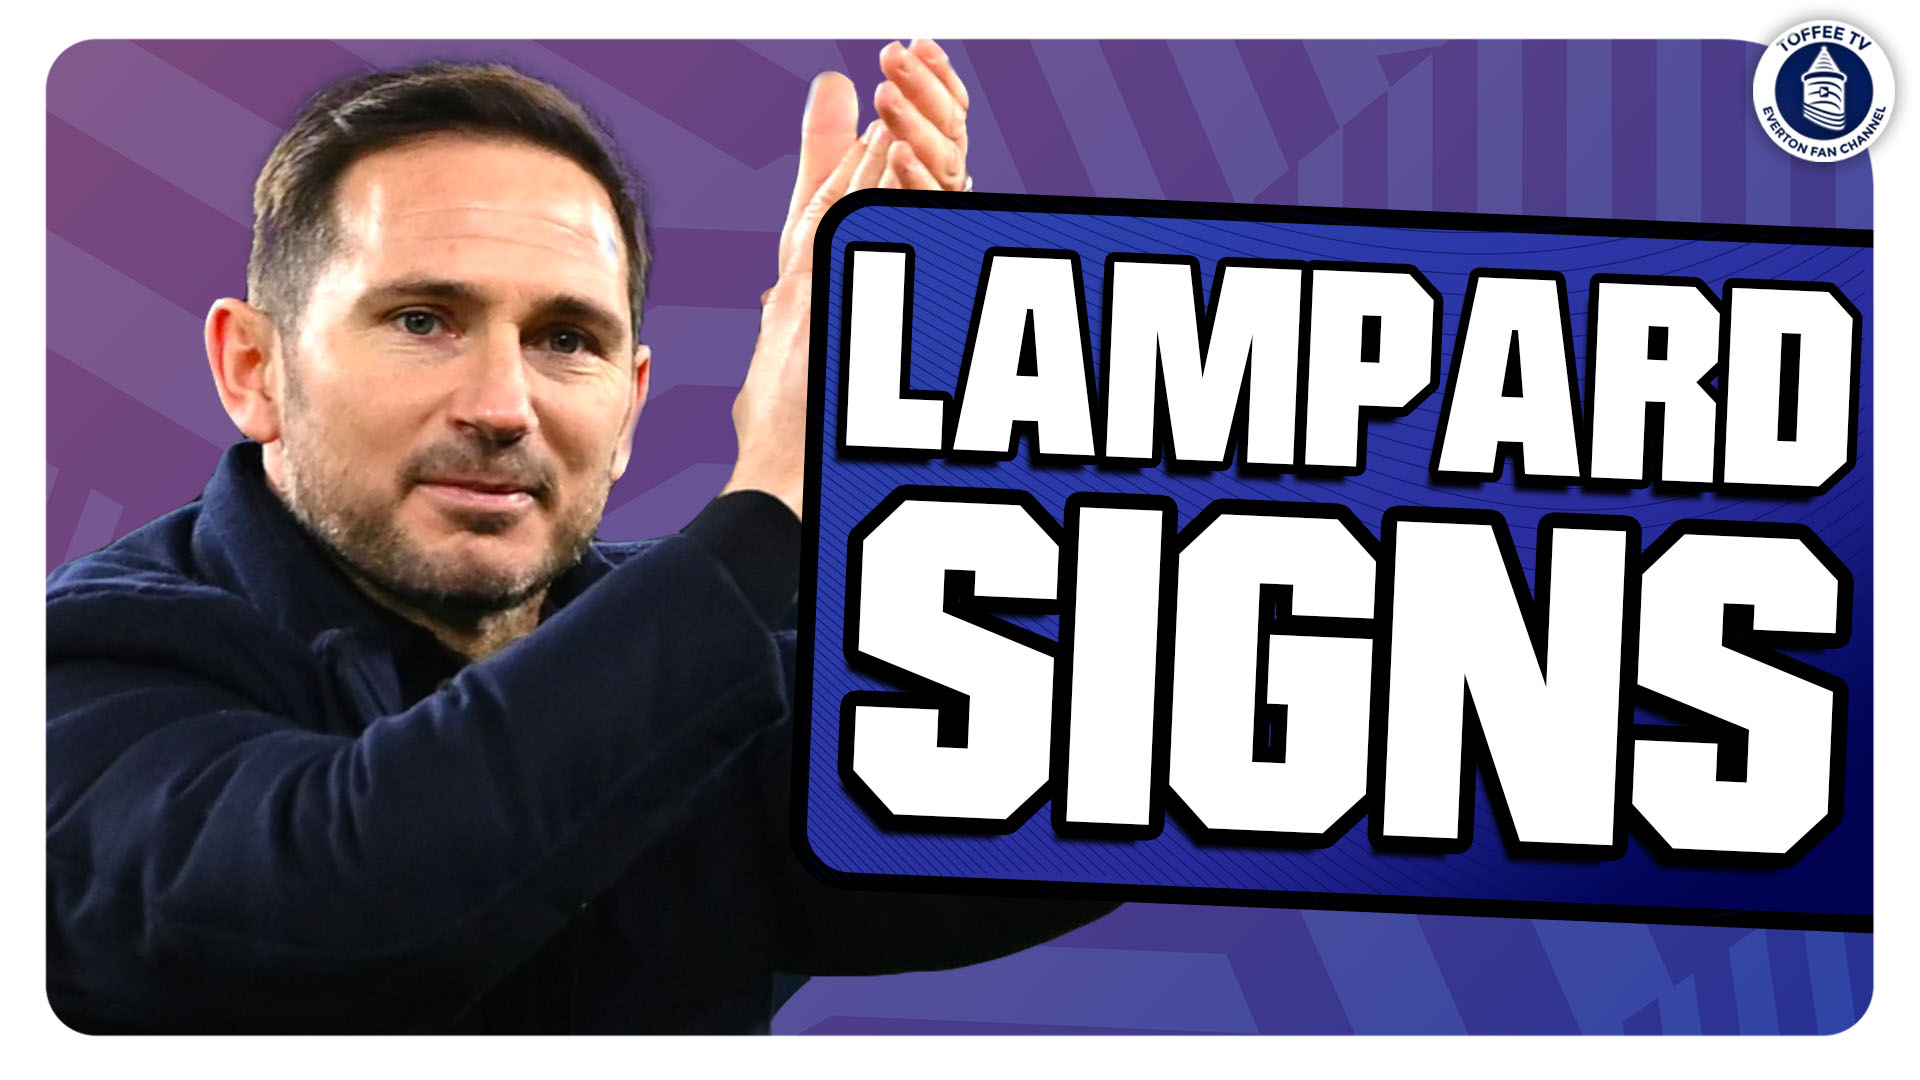 Featured image for “Frank Lampard Becomes The New Everton Manager”